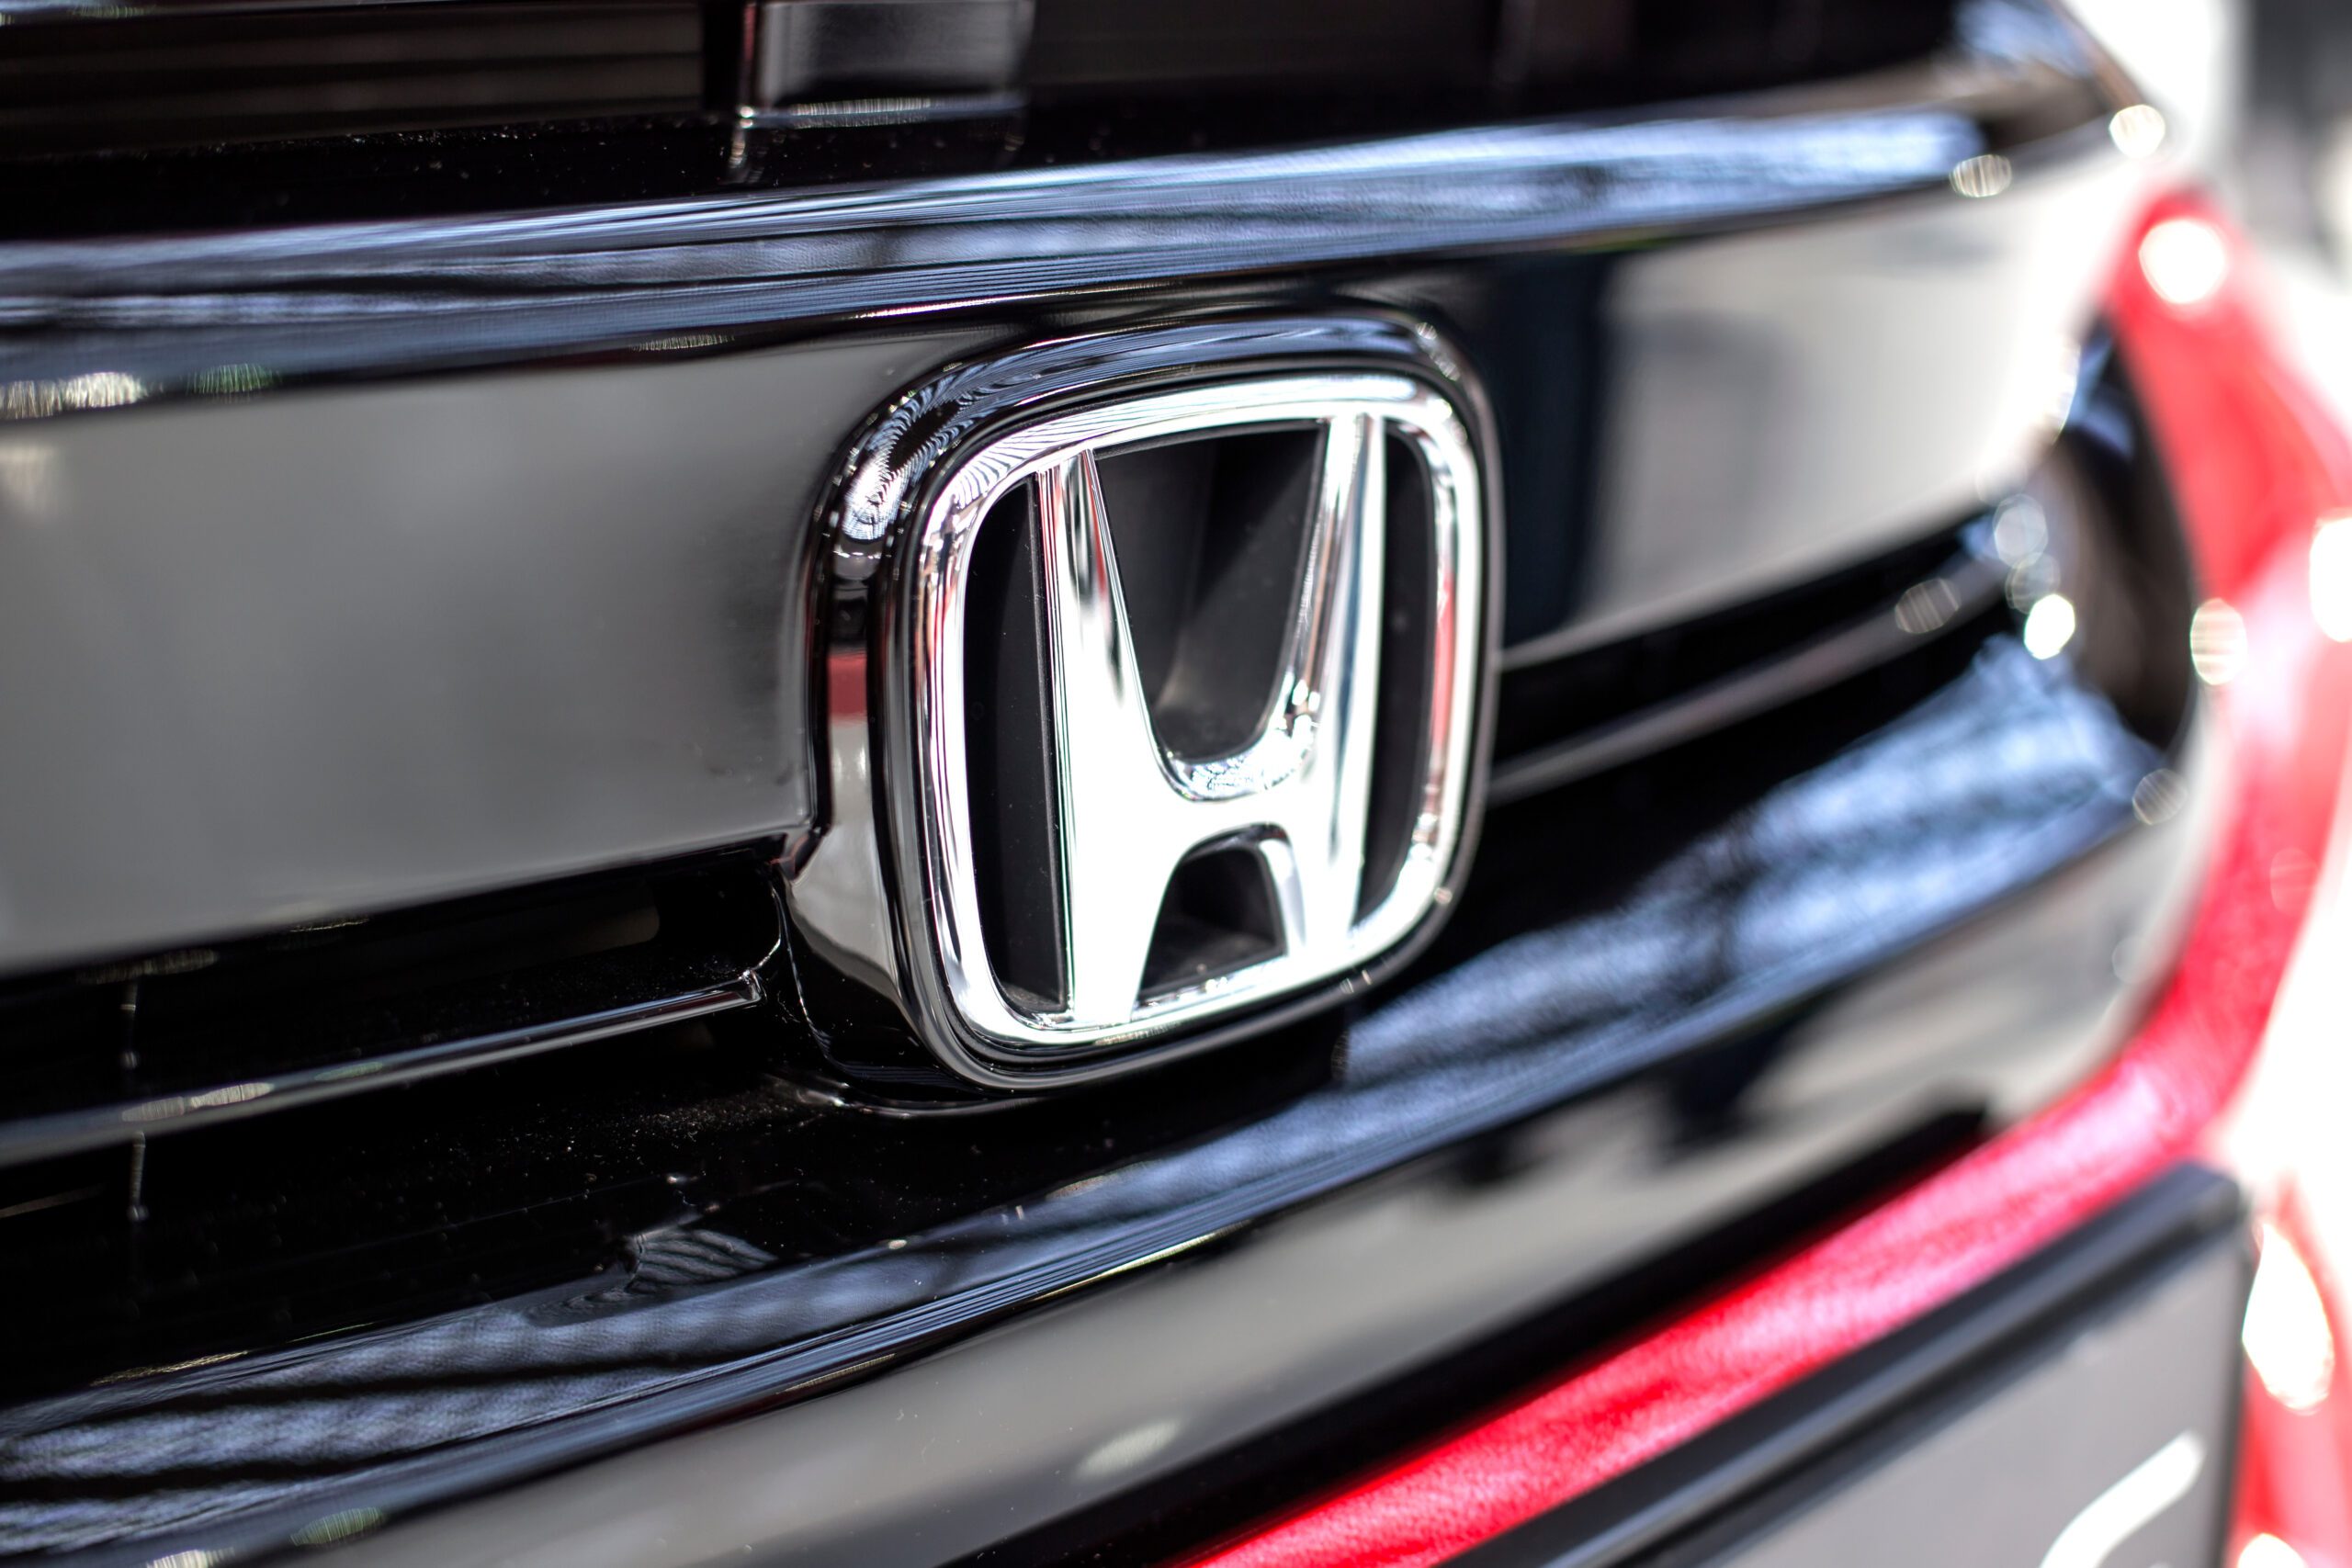 A lawsuit alleges transmissions in Honda Odysseys have two software modules that fail to communicate properly